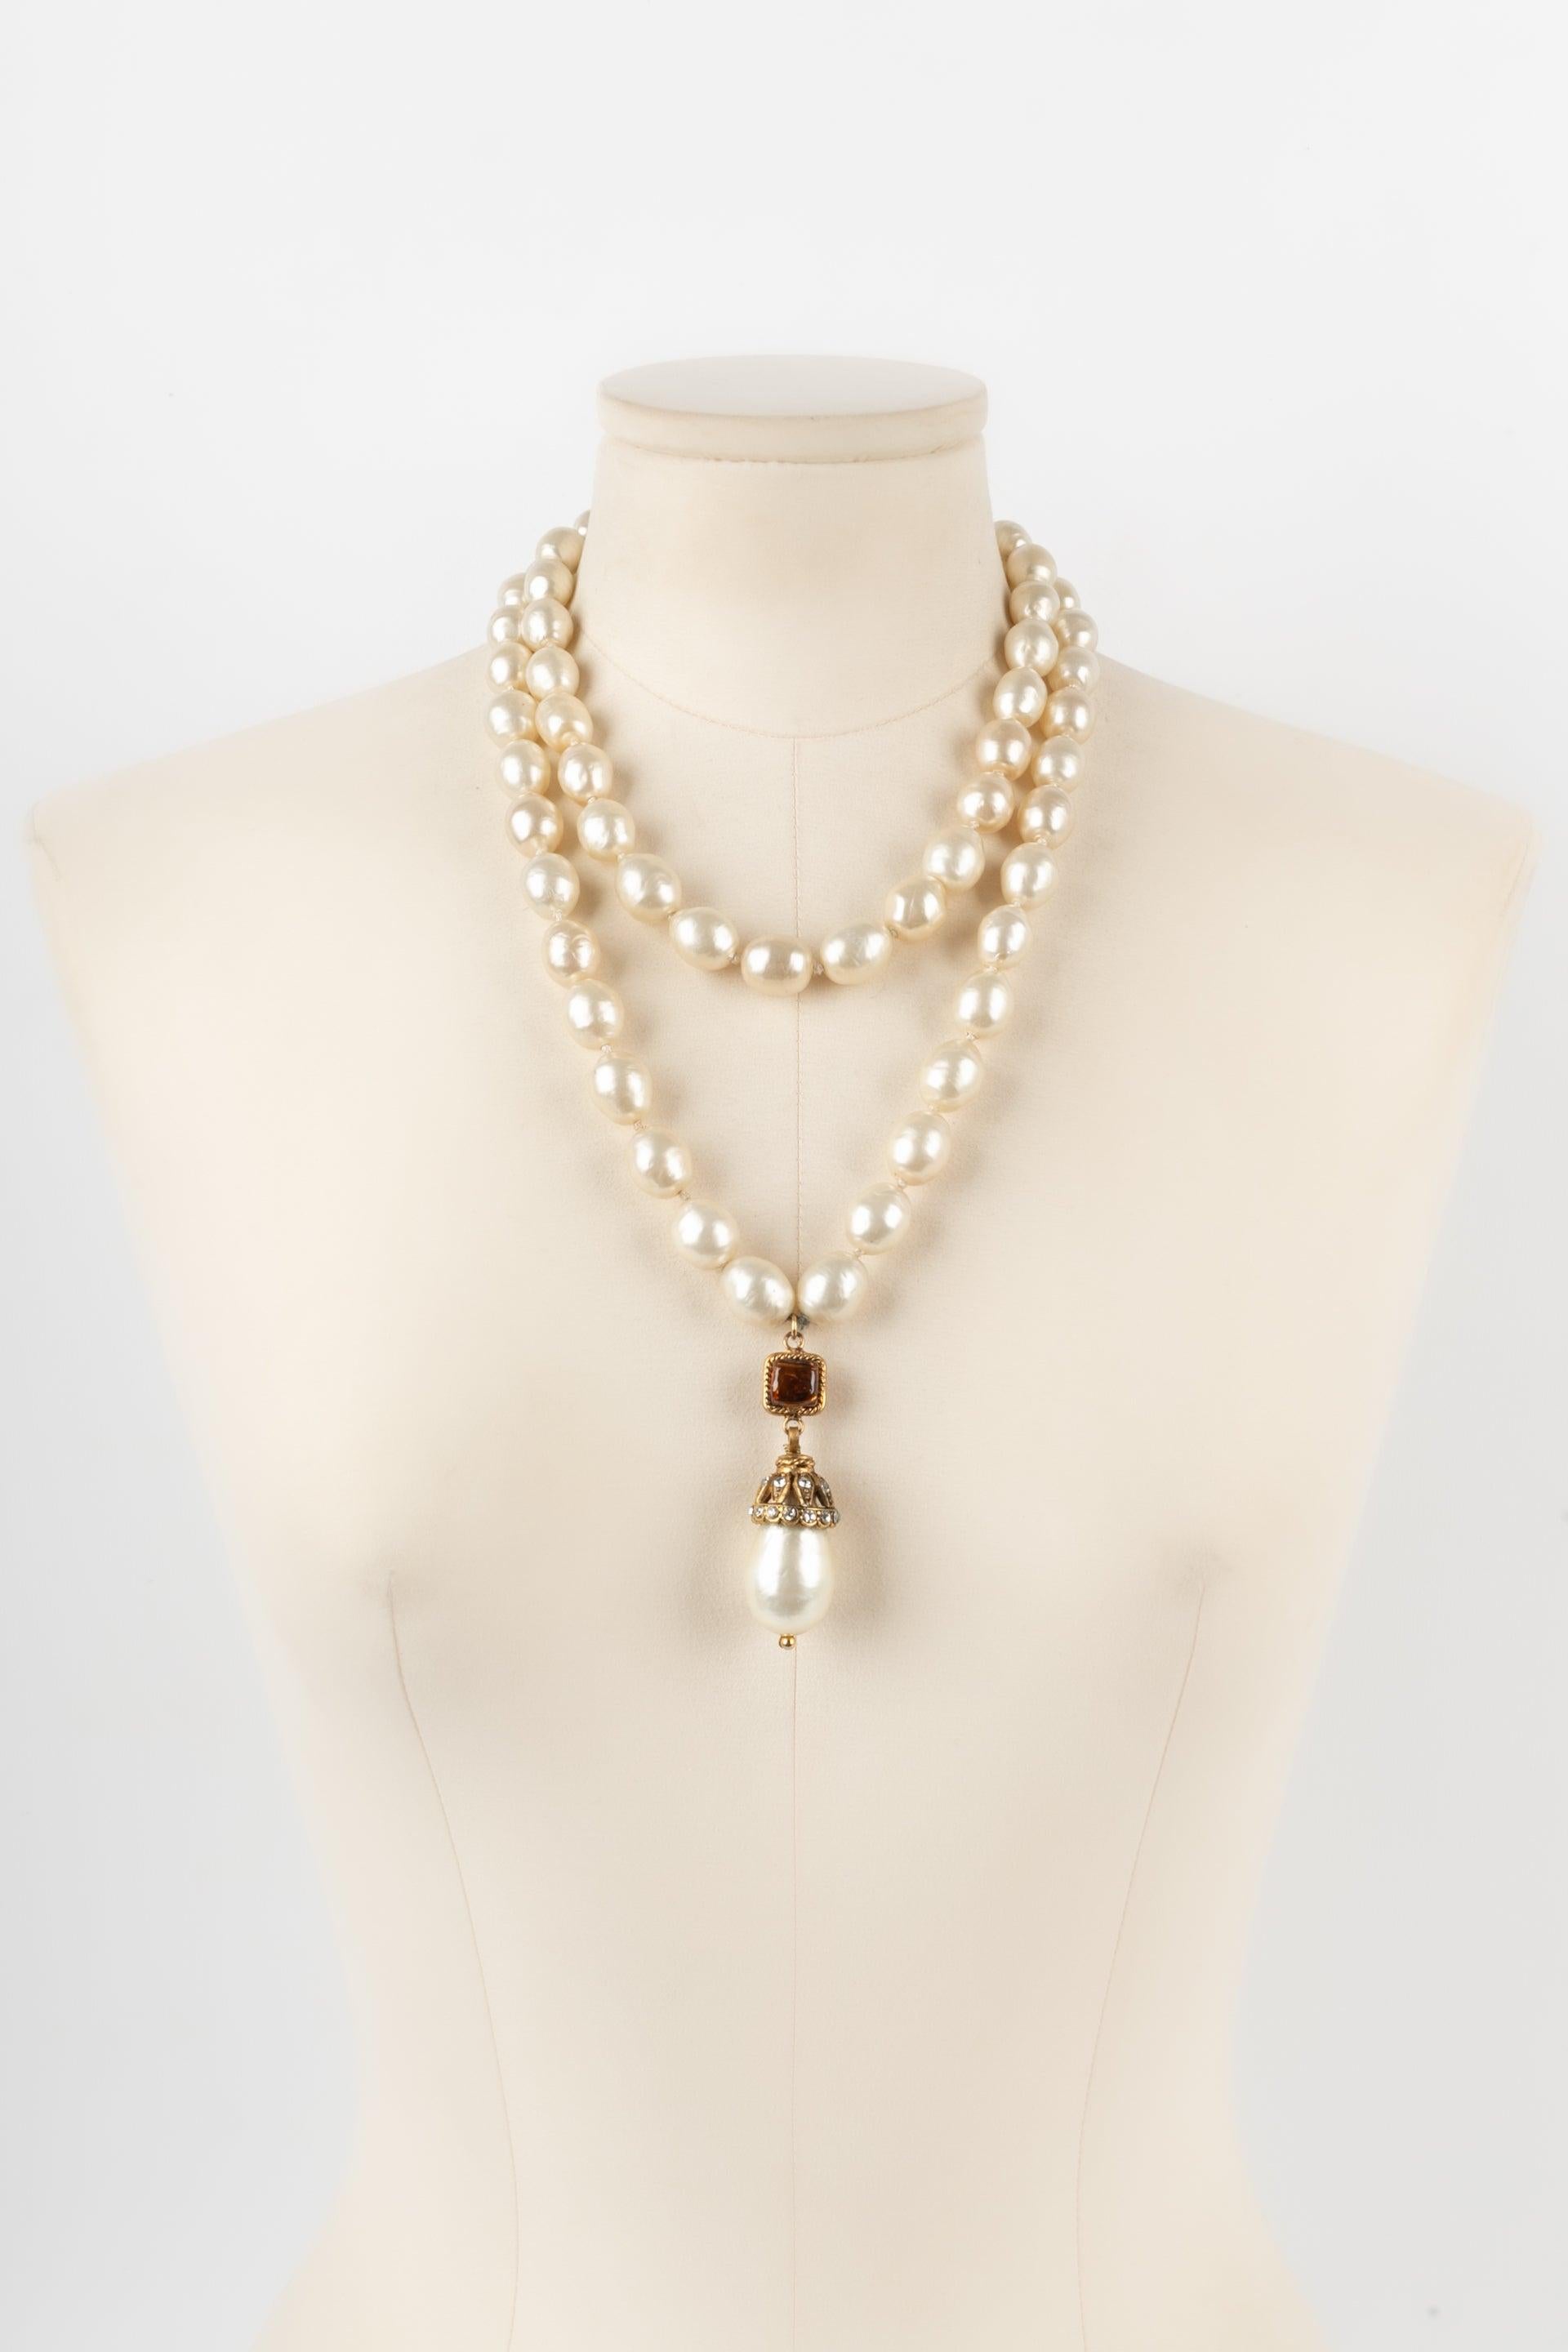 Chanel - (Made in France) Necklace composed of two knot assembled rows of costume pearls, a pendant a golden metal fastener, and glass paste. Jewelry from the 1980s.

Additional information:
Condition: Very good condition
Dimensions: Shorter row